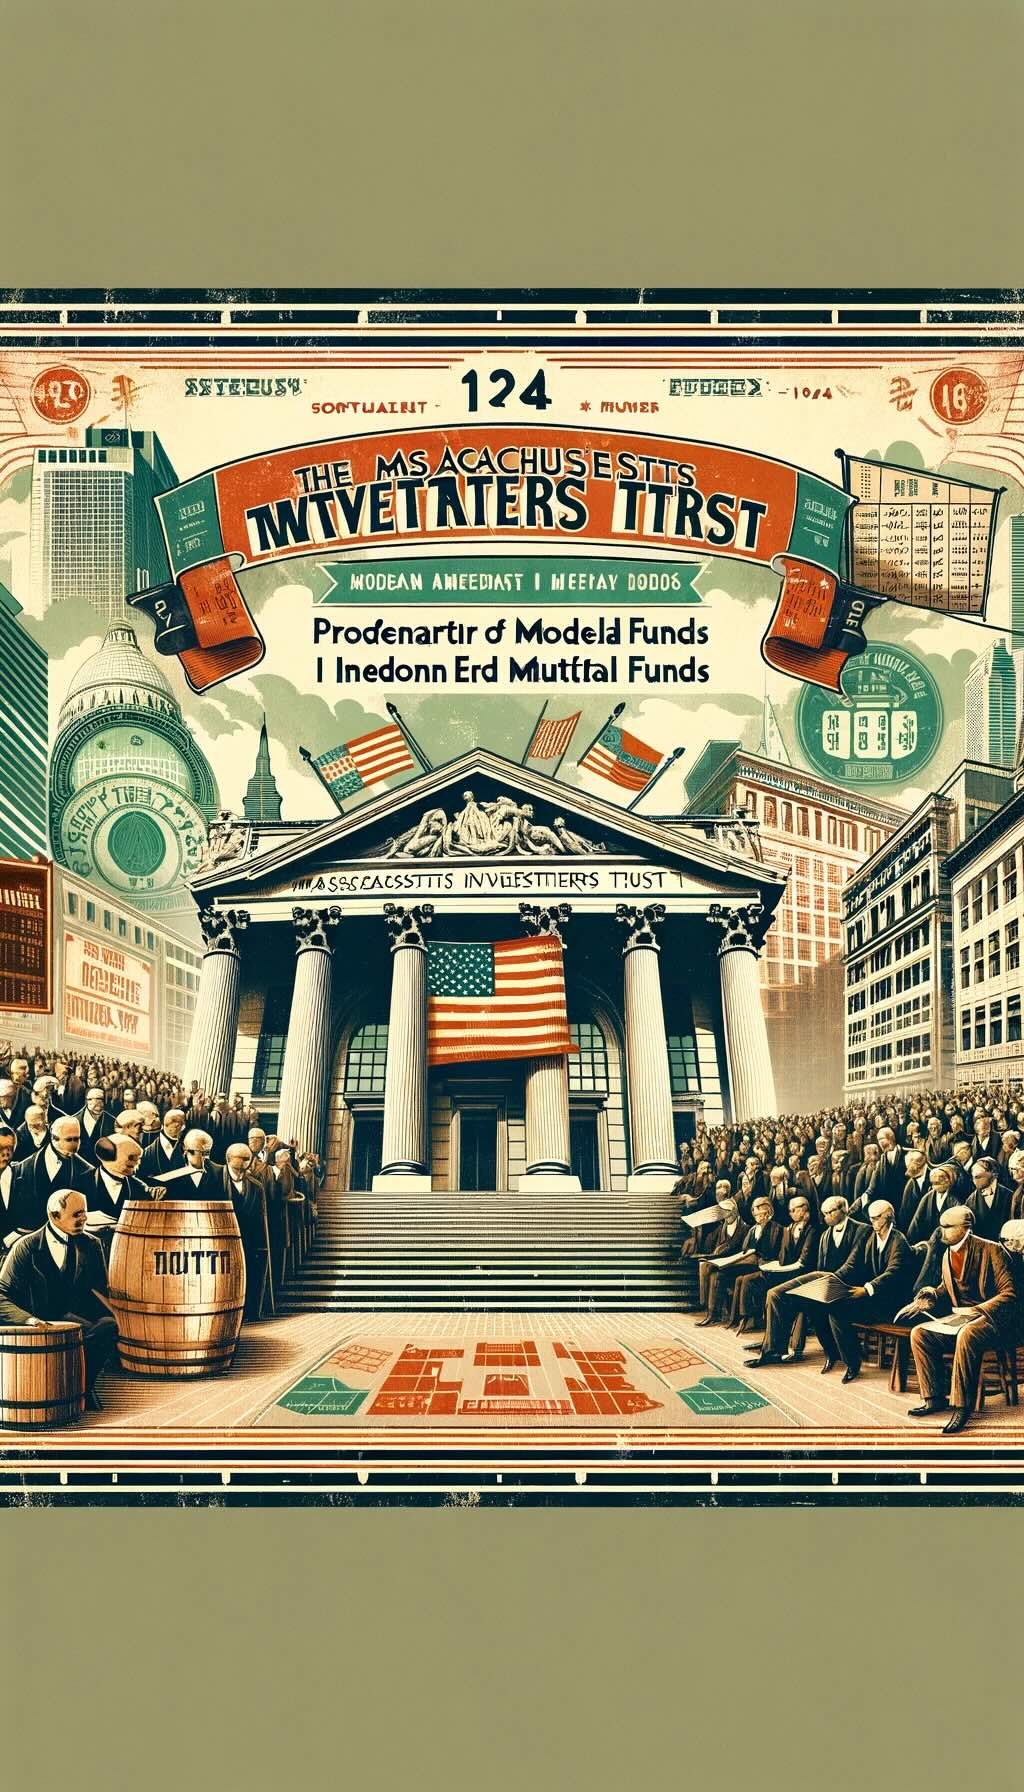 Massachusetts Investors Trust (MIT) as the progenitor of modern mutual funds, reflecting the era of its inauguration in 1924 and capturing the democratization of the stock market